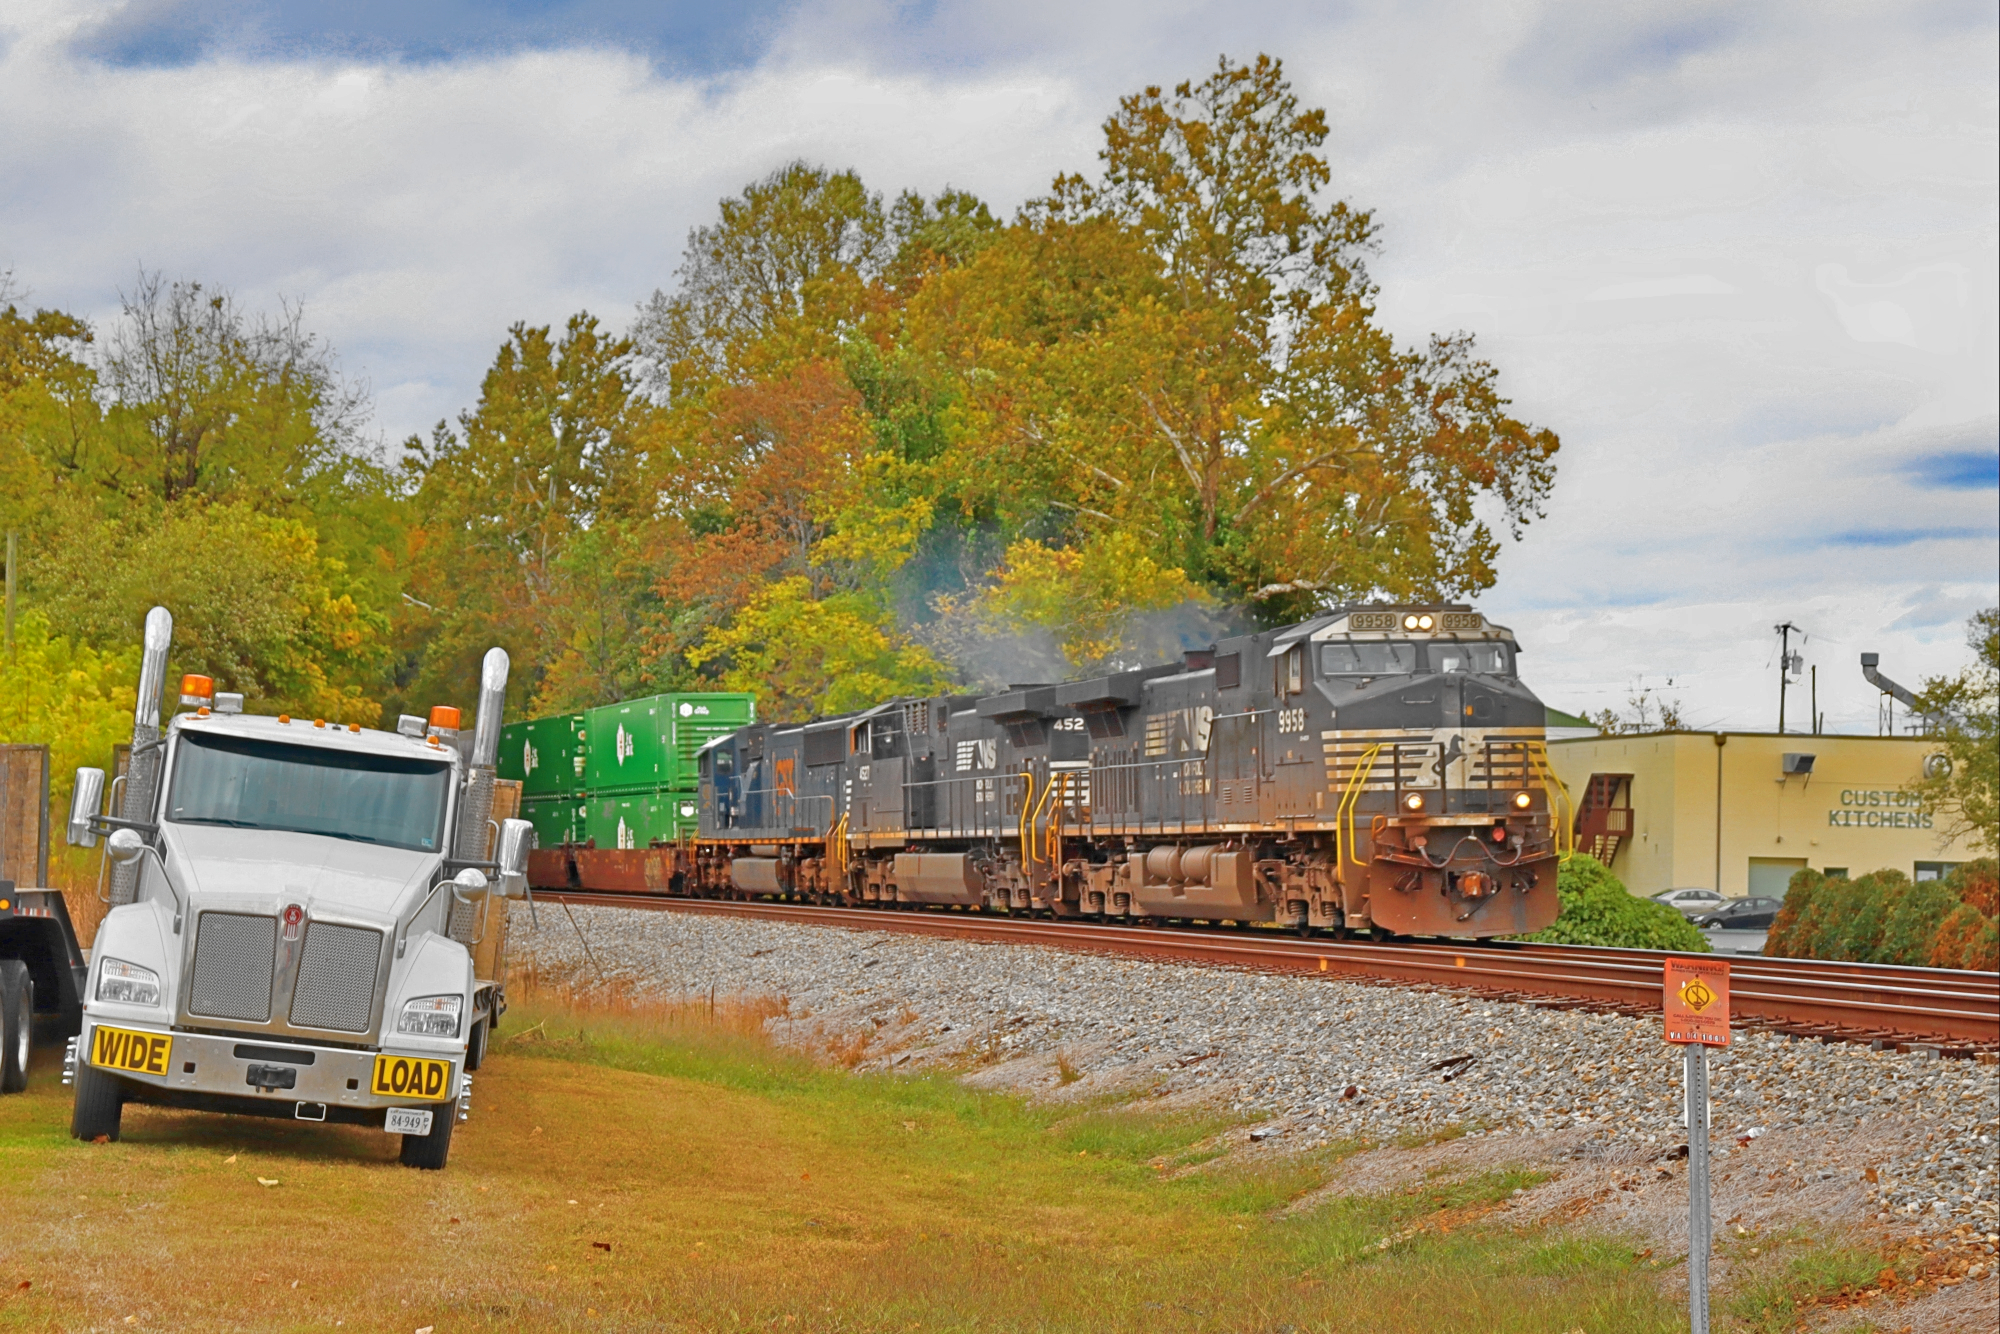 NS 9958 is a class GE C40-9W (Dash 9-40CW) and  is pictured in Charlottesville, VA, United States.  This was taken along the NS Washington District  on the Norfolk Southern. Photo Copyright: Robby Lefkowitz uploaded to Railroad Gallery on 11/16/2022. This photograph of NS 9958 was taken on Thursday, October 20, 2022. All Rights Reserved. 